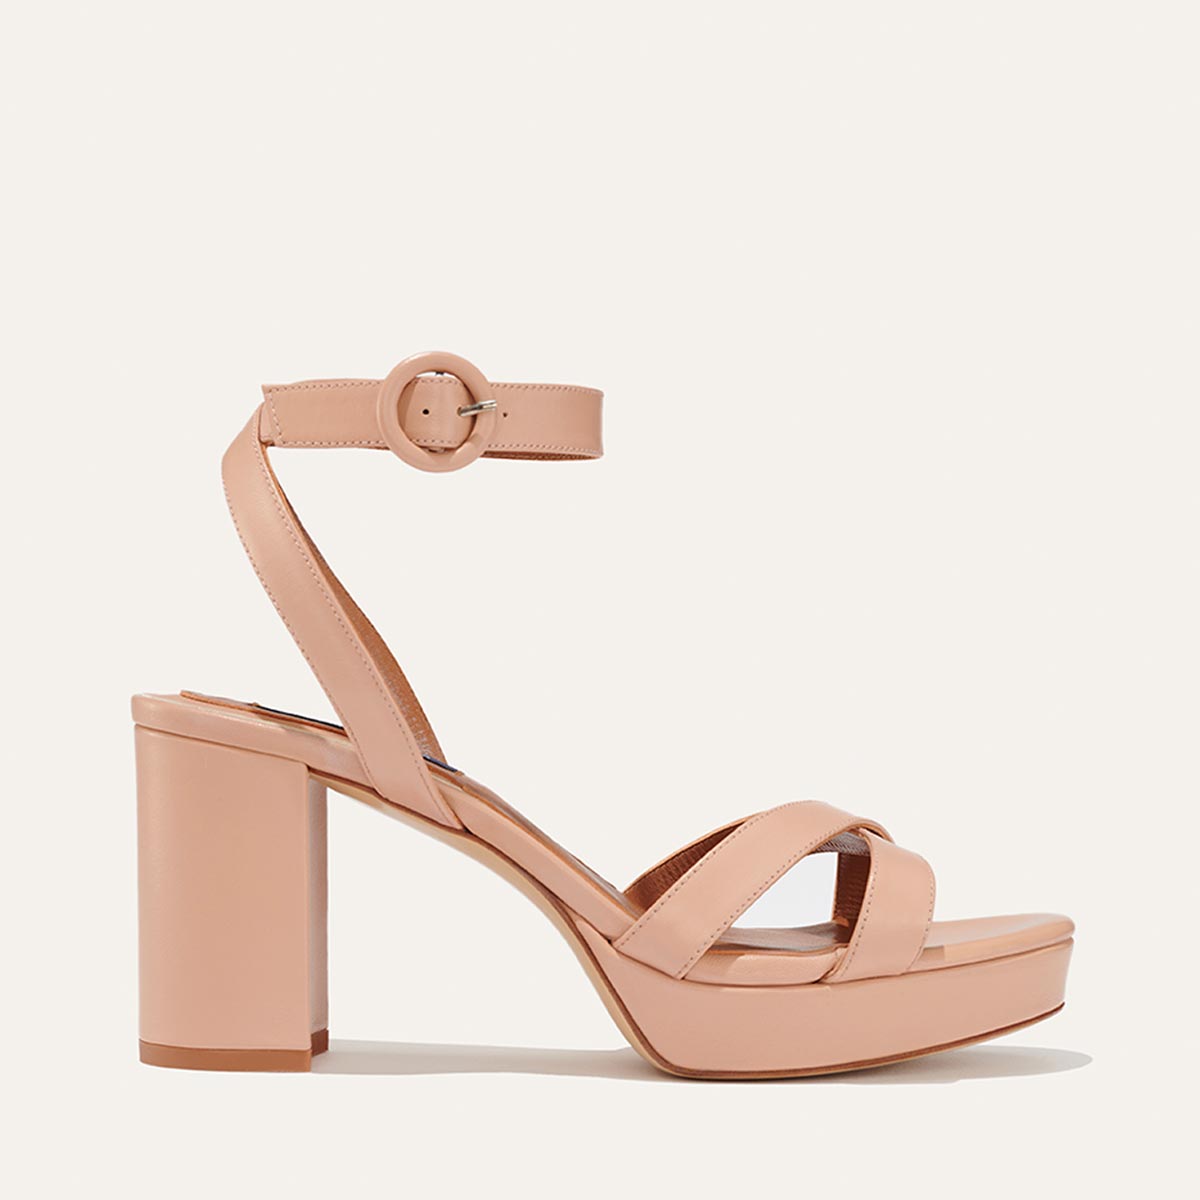 Margaux's classic and comfortable Platform Sandal in nude pink nappa leather with crossed straps and a walkable block heel